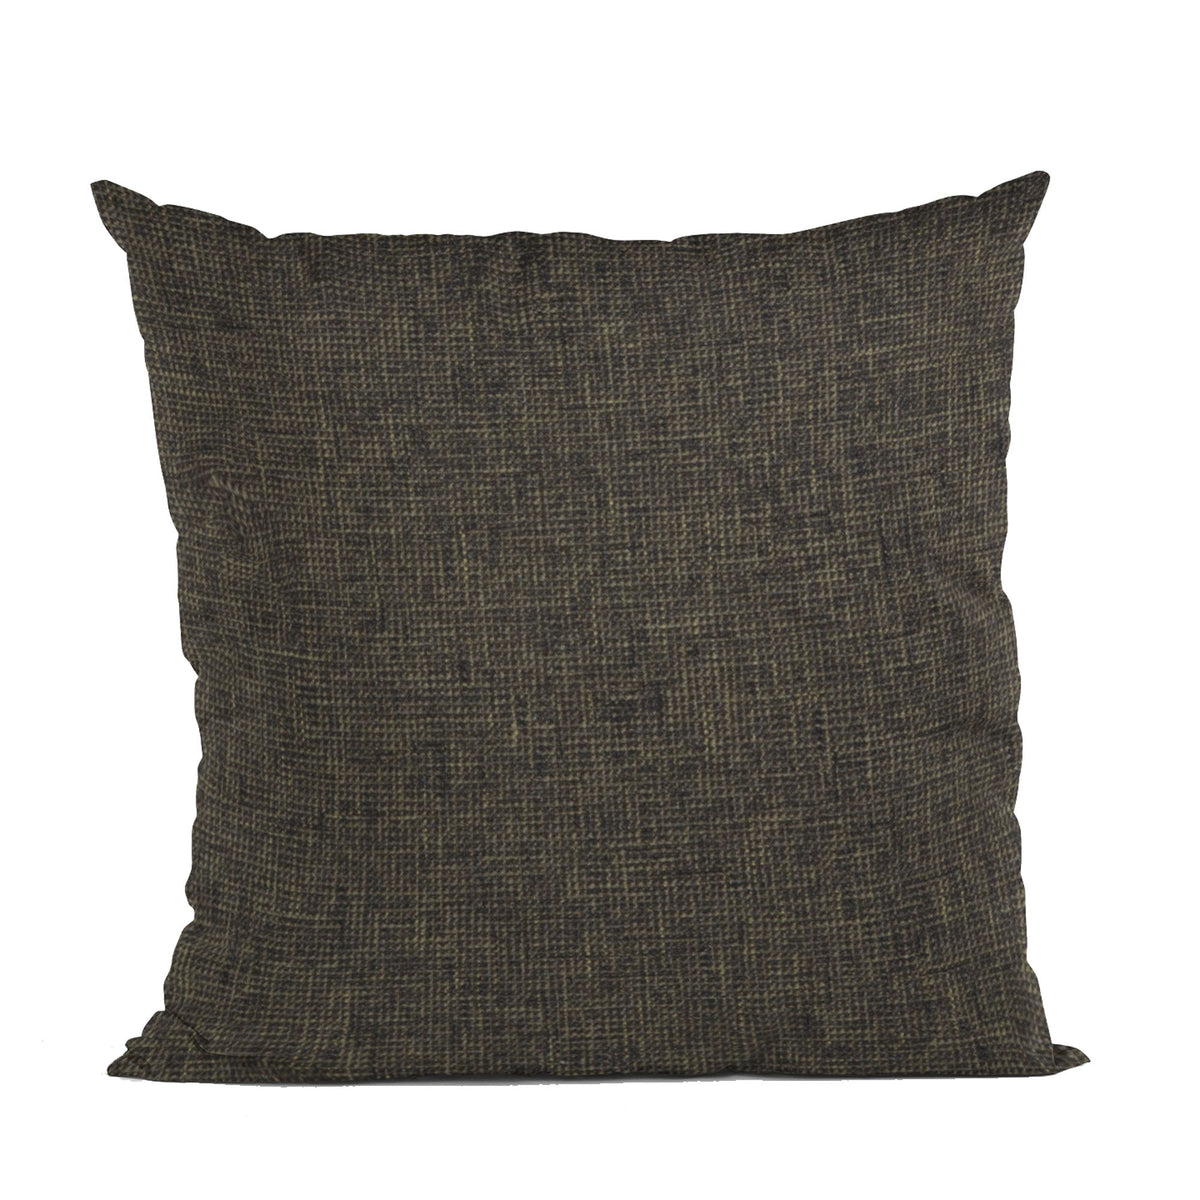 Plutus Espresso Waffle Textured Solid, Sort Of A Waffle Texture Luxury Throw Pillow-0